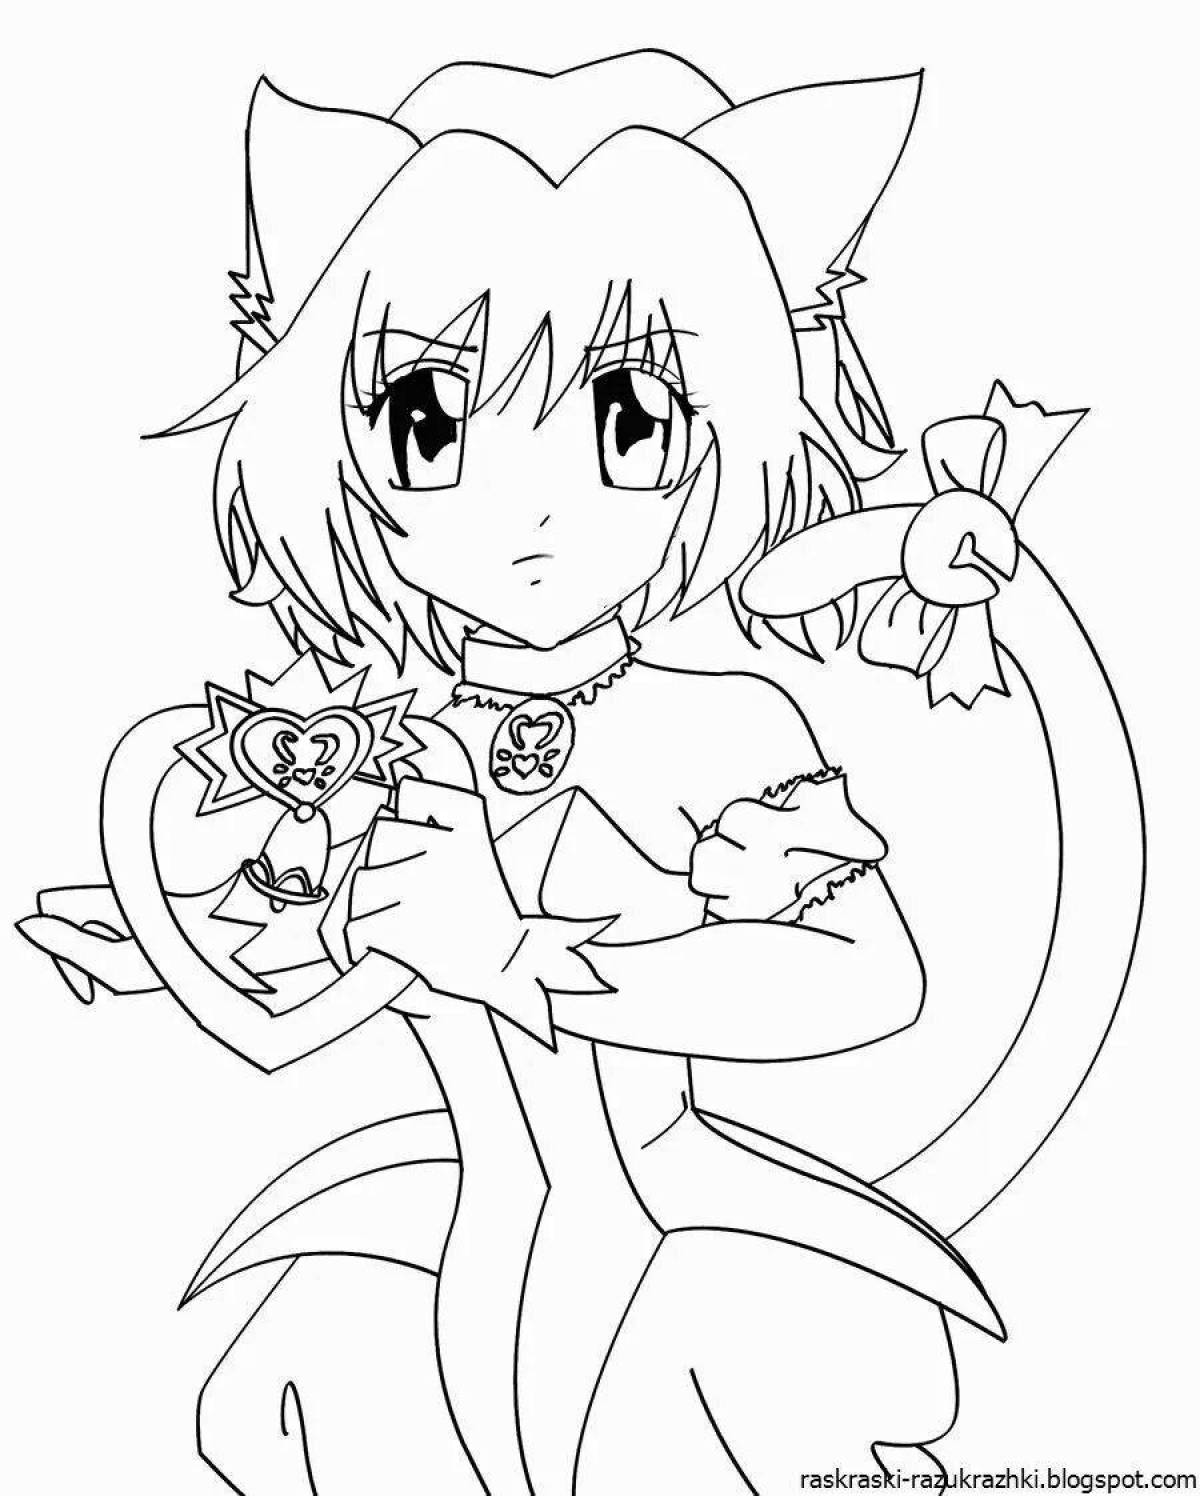 Zany coloring page cat anime girl